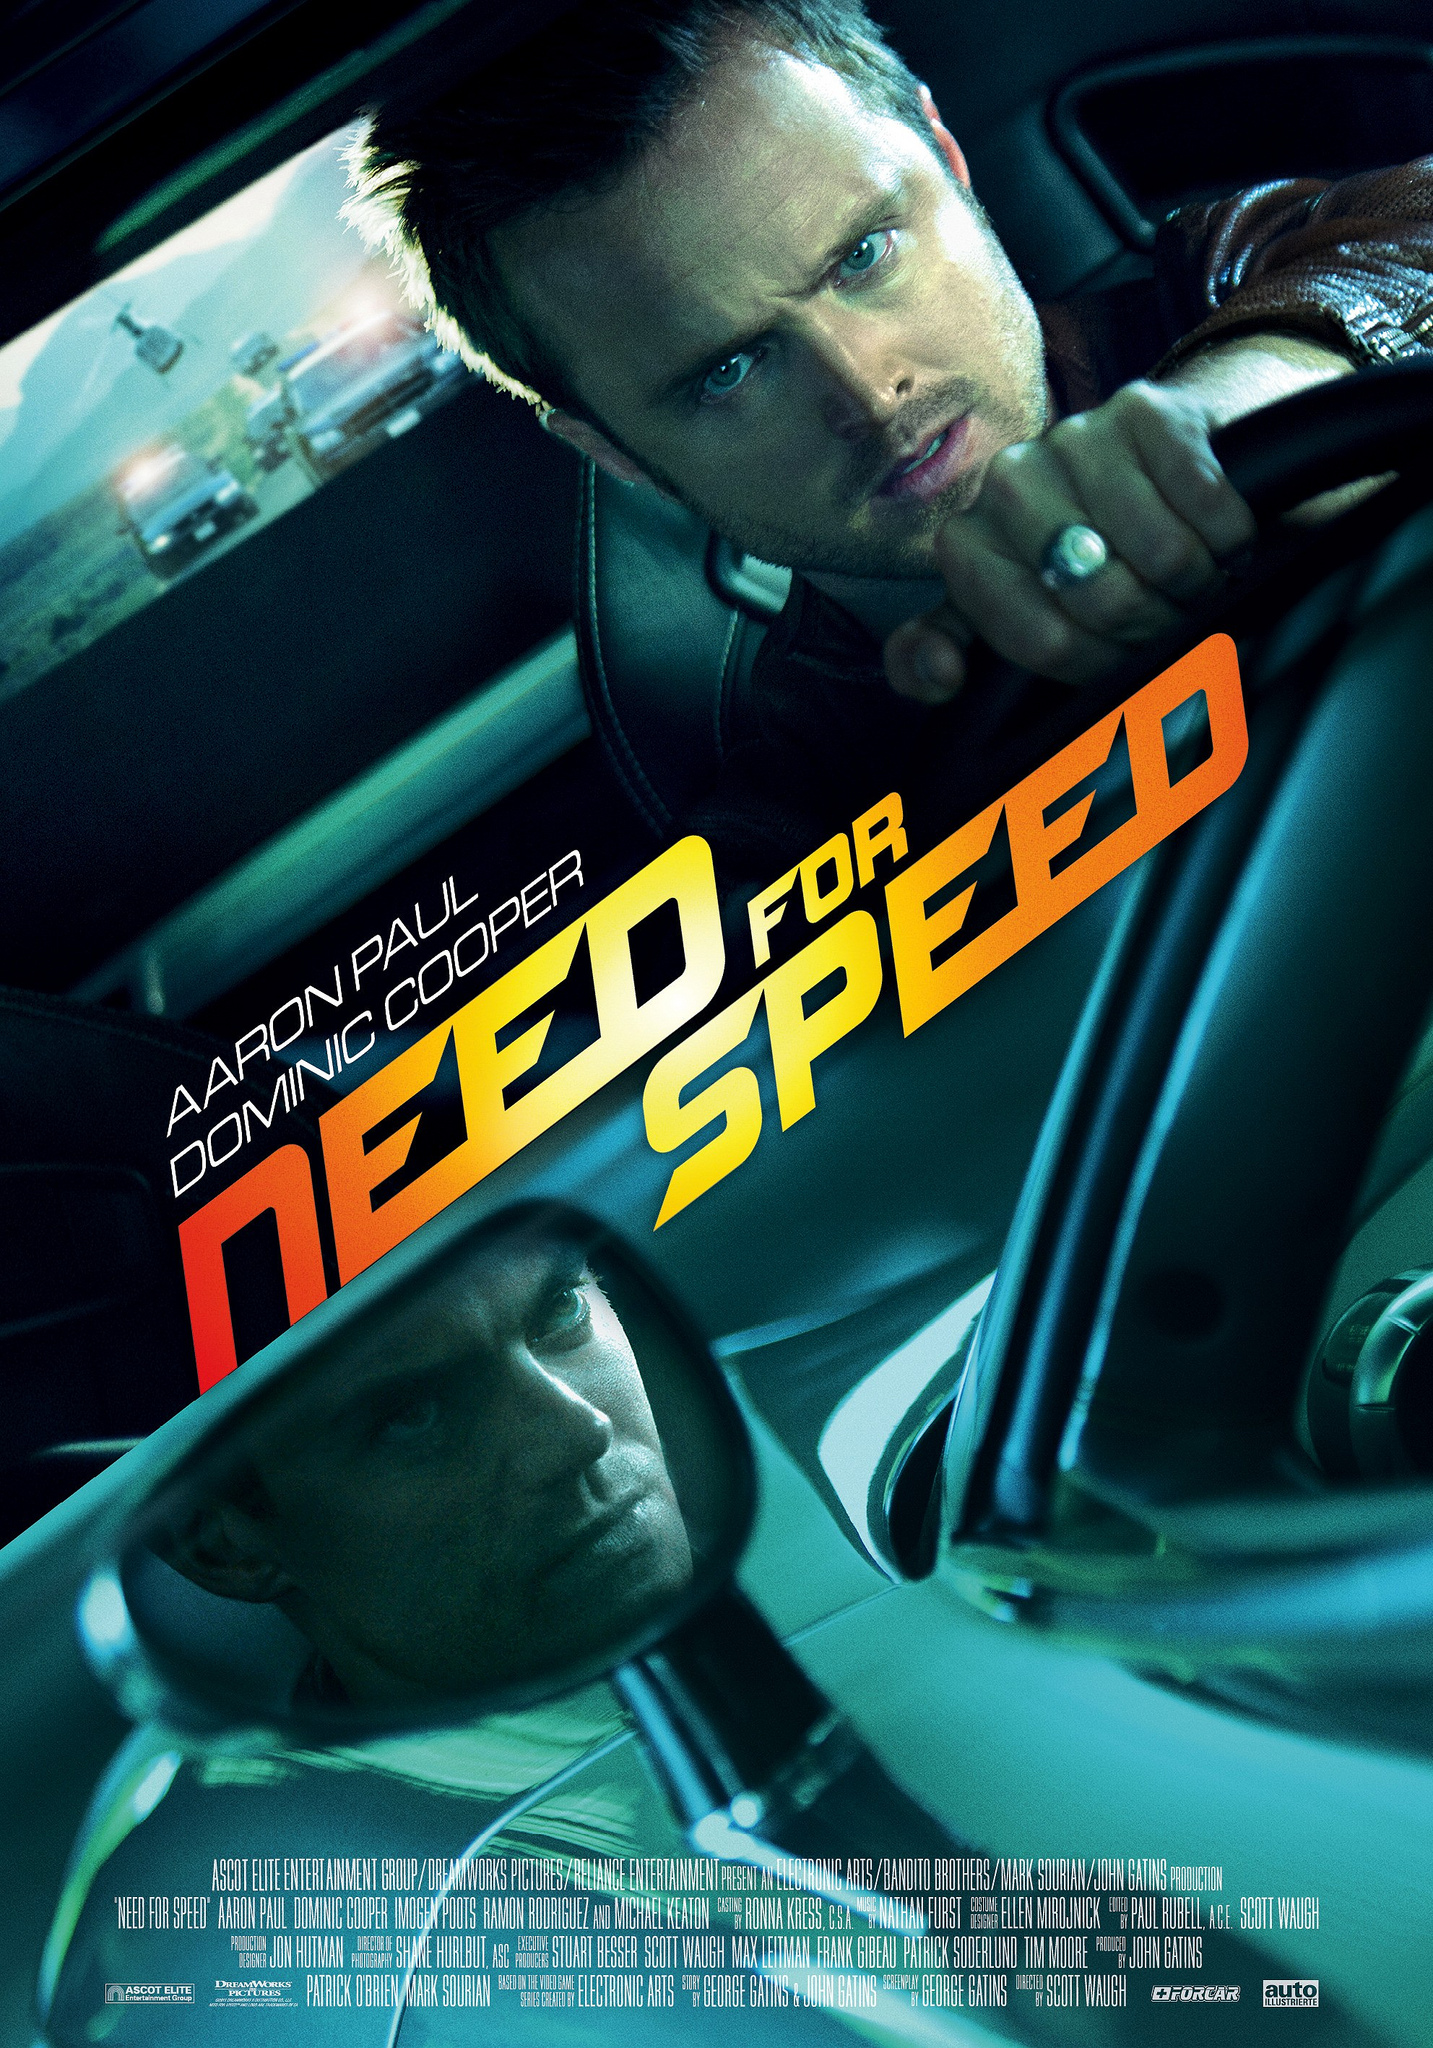 The Need For Speed Movie Is Great And Terrible - GameSpot